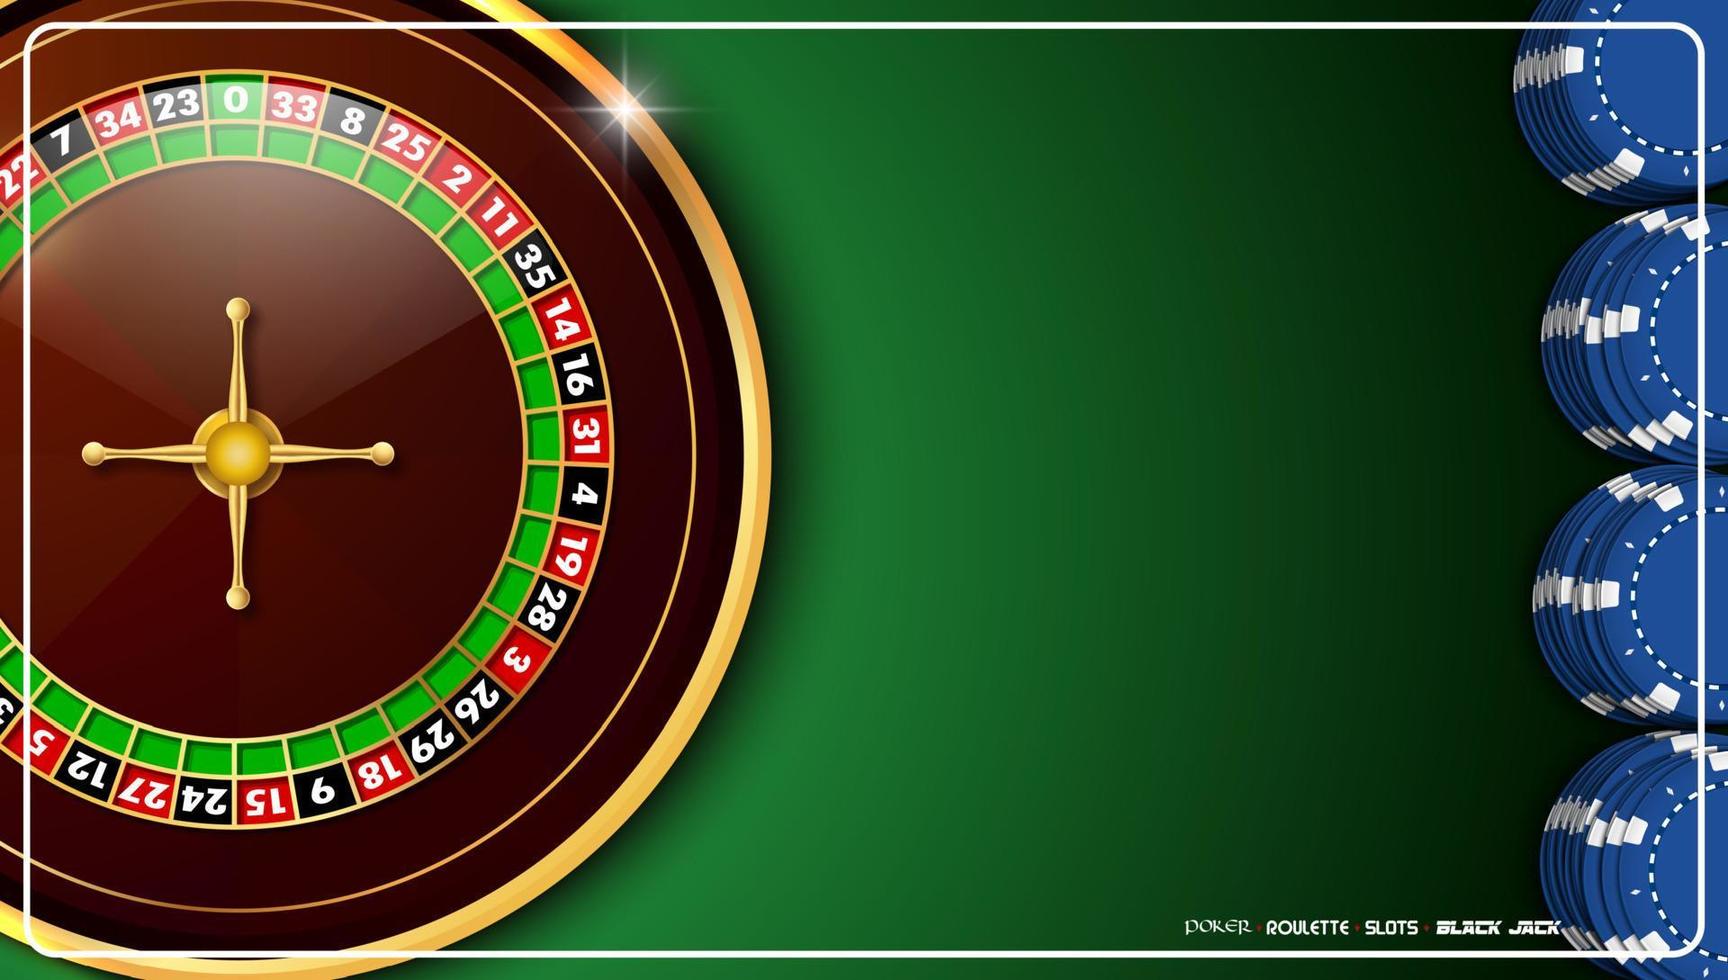 Casino roulette wheel with casino chips on green casino table vector